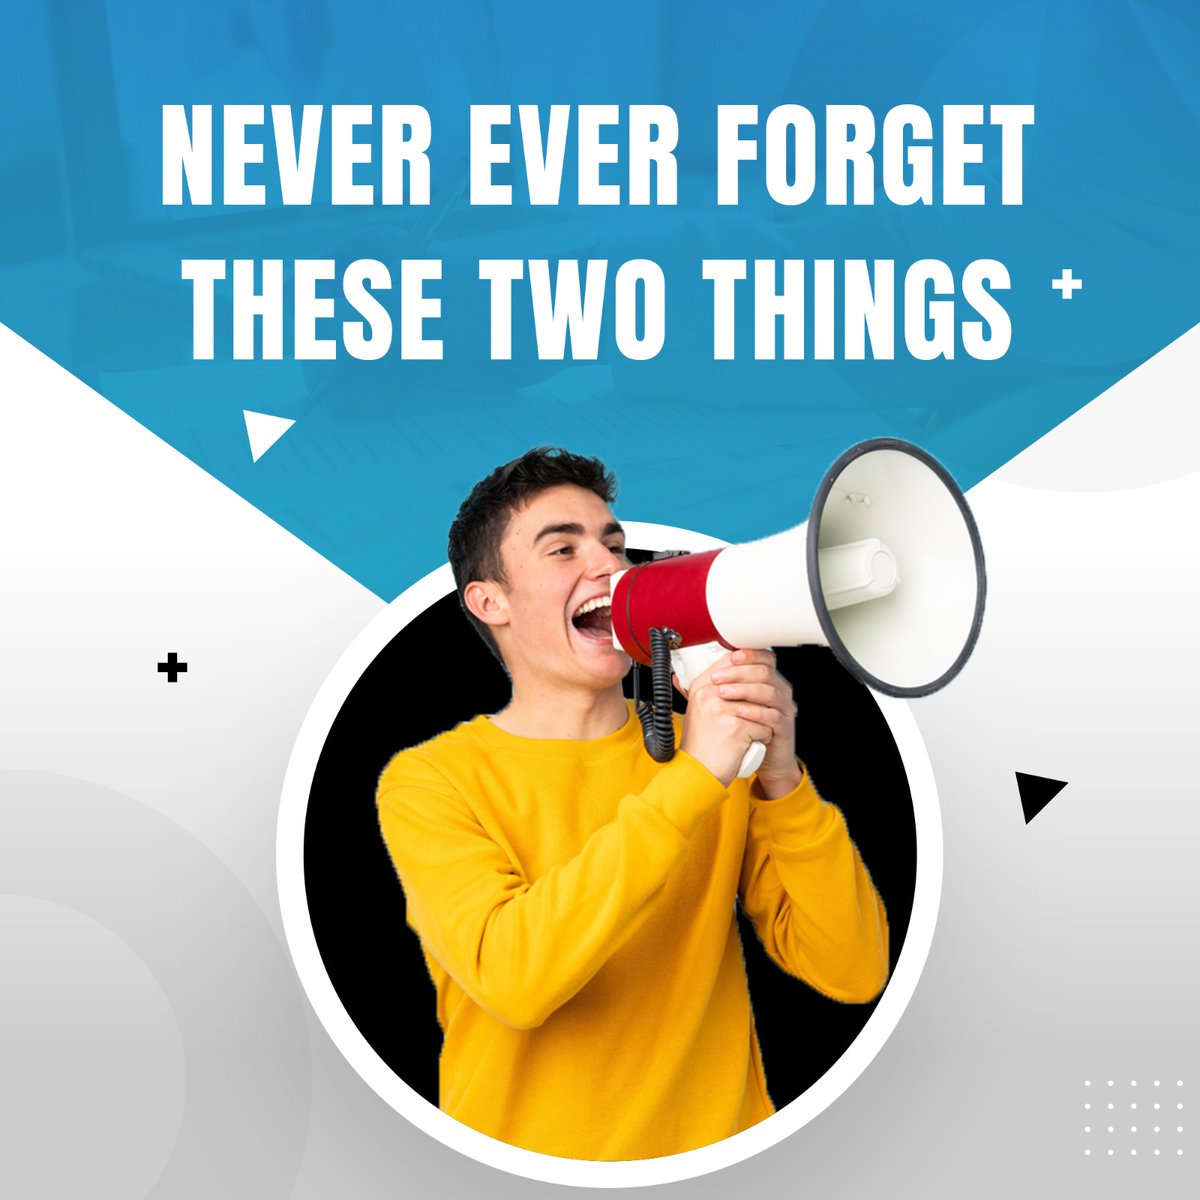 📣 Never Ever forget these two things:
🔰 The customer is always right
🔰 The customer is the king
#amazon  #customerservicesupport #customer #amazonbusiness #letsconnect #letsgrow